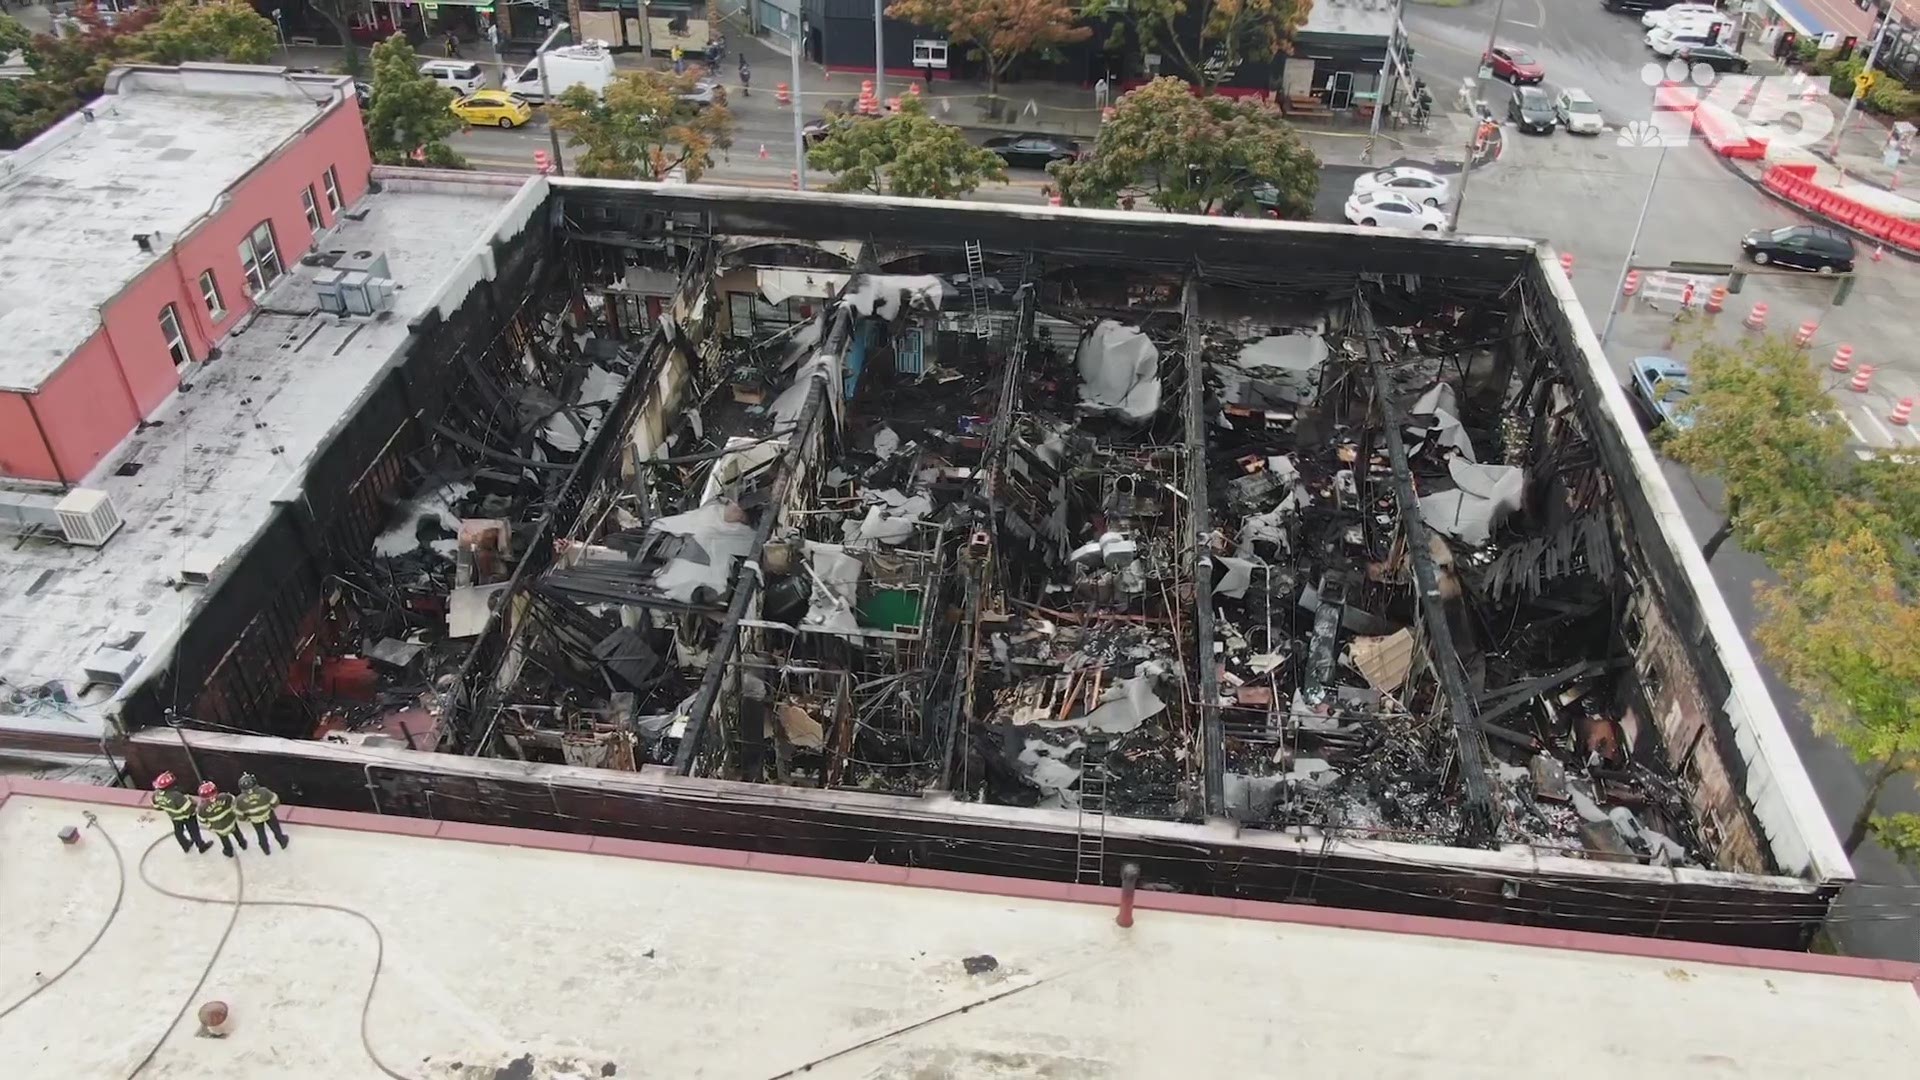 La Isla restaurant, Supercuts, Kitchen N Things and Coleman Jewelers were destroyed in a downtown Ballard fire on Oct. 7, 2019. Pho Big Bowl was damaged.